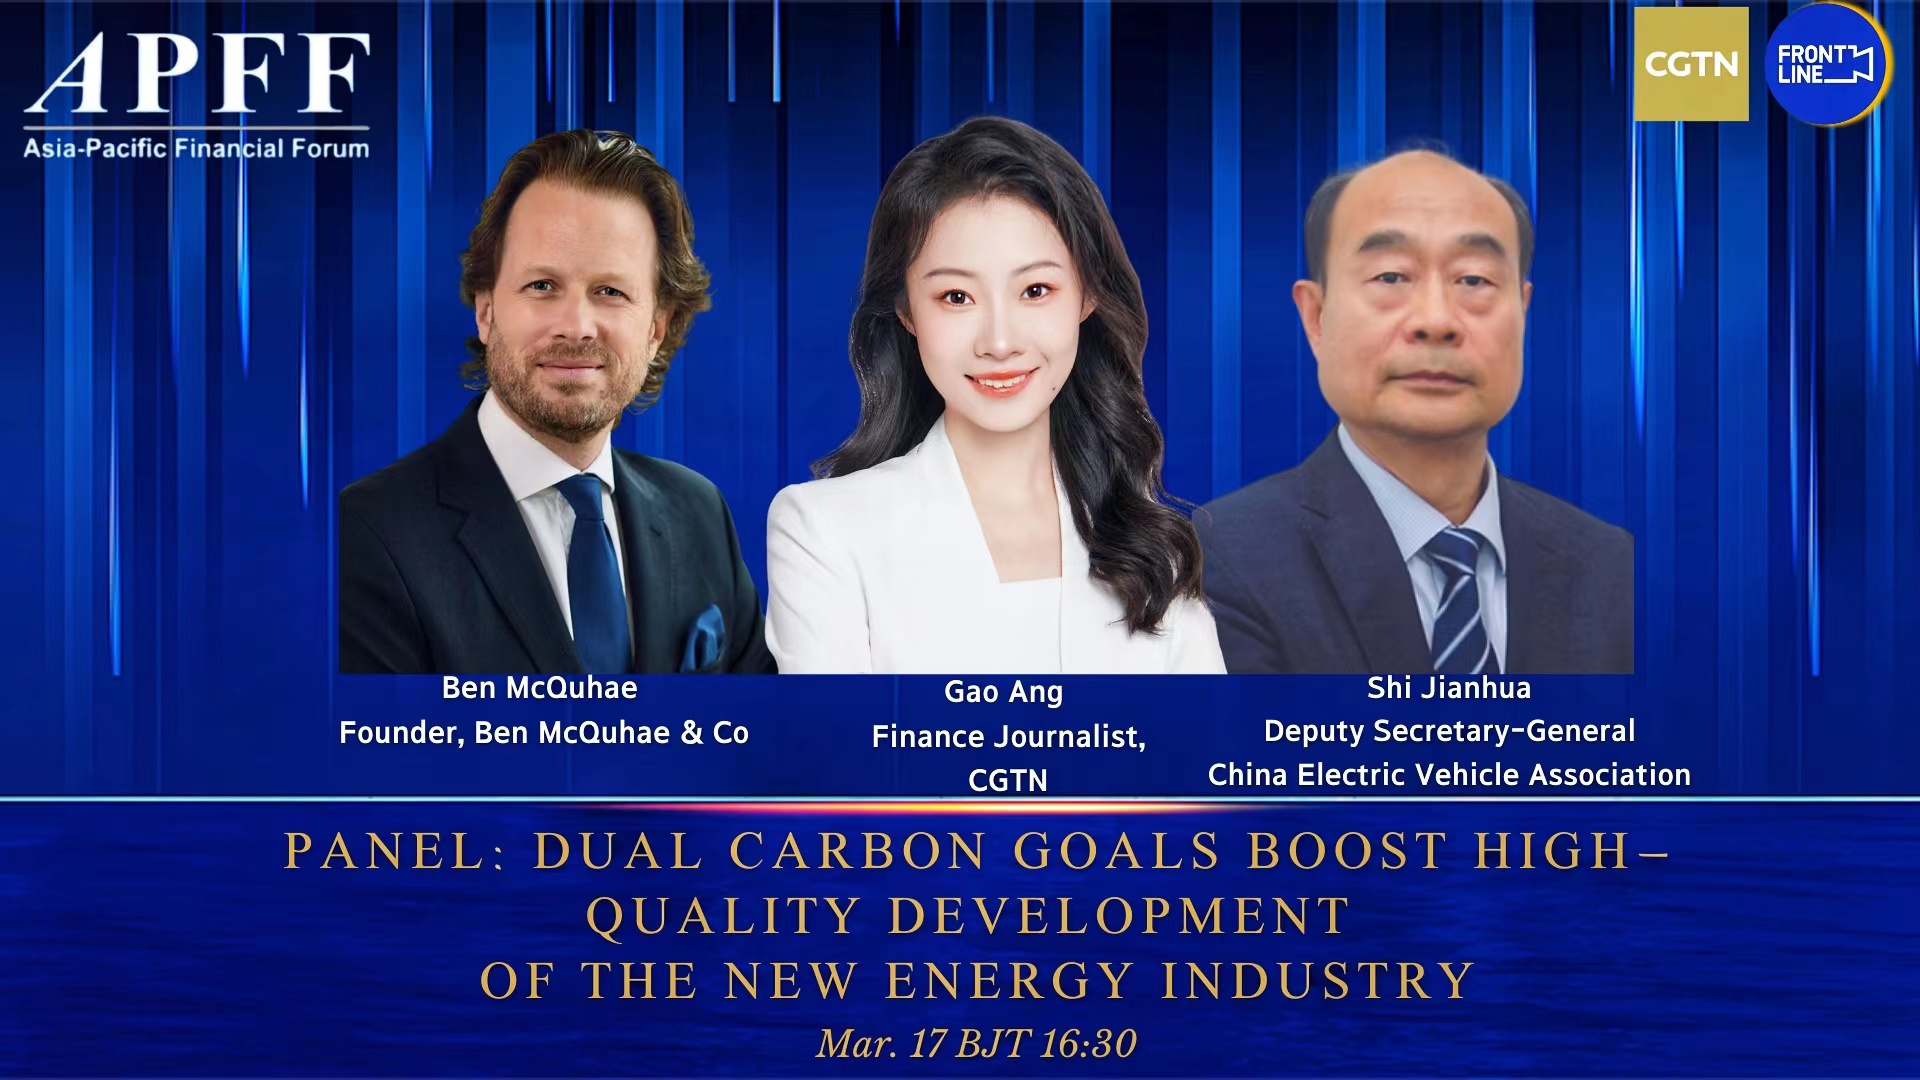 Live: Asia-Pacific Financial Forum - Dual carbon goals boost high-quality development of the new energy industry